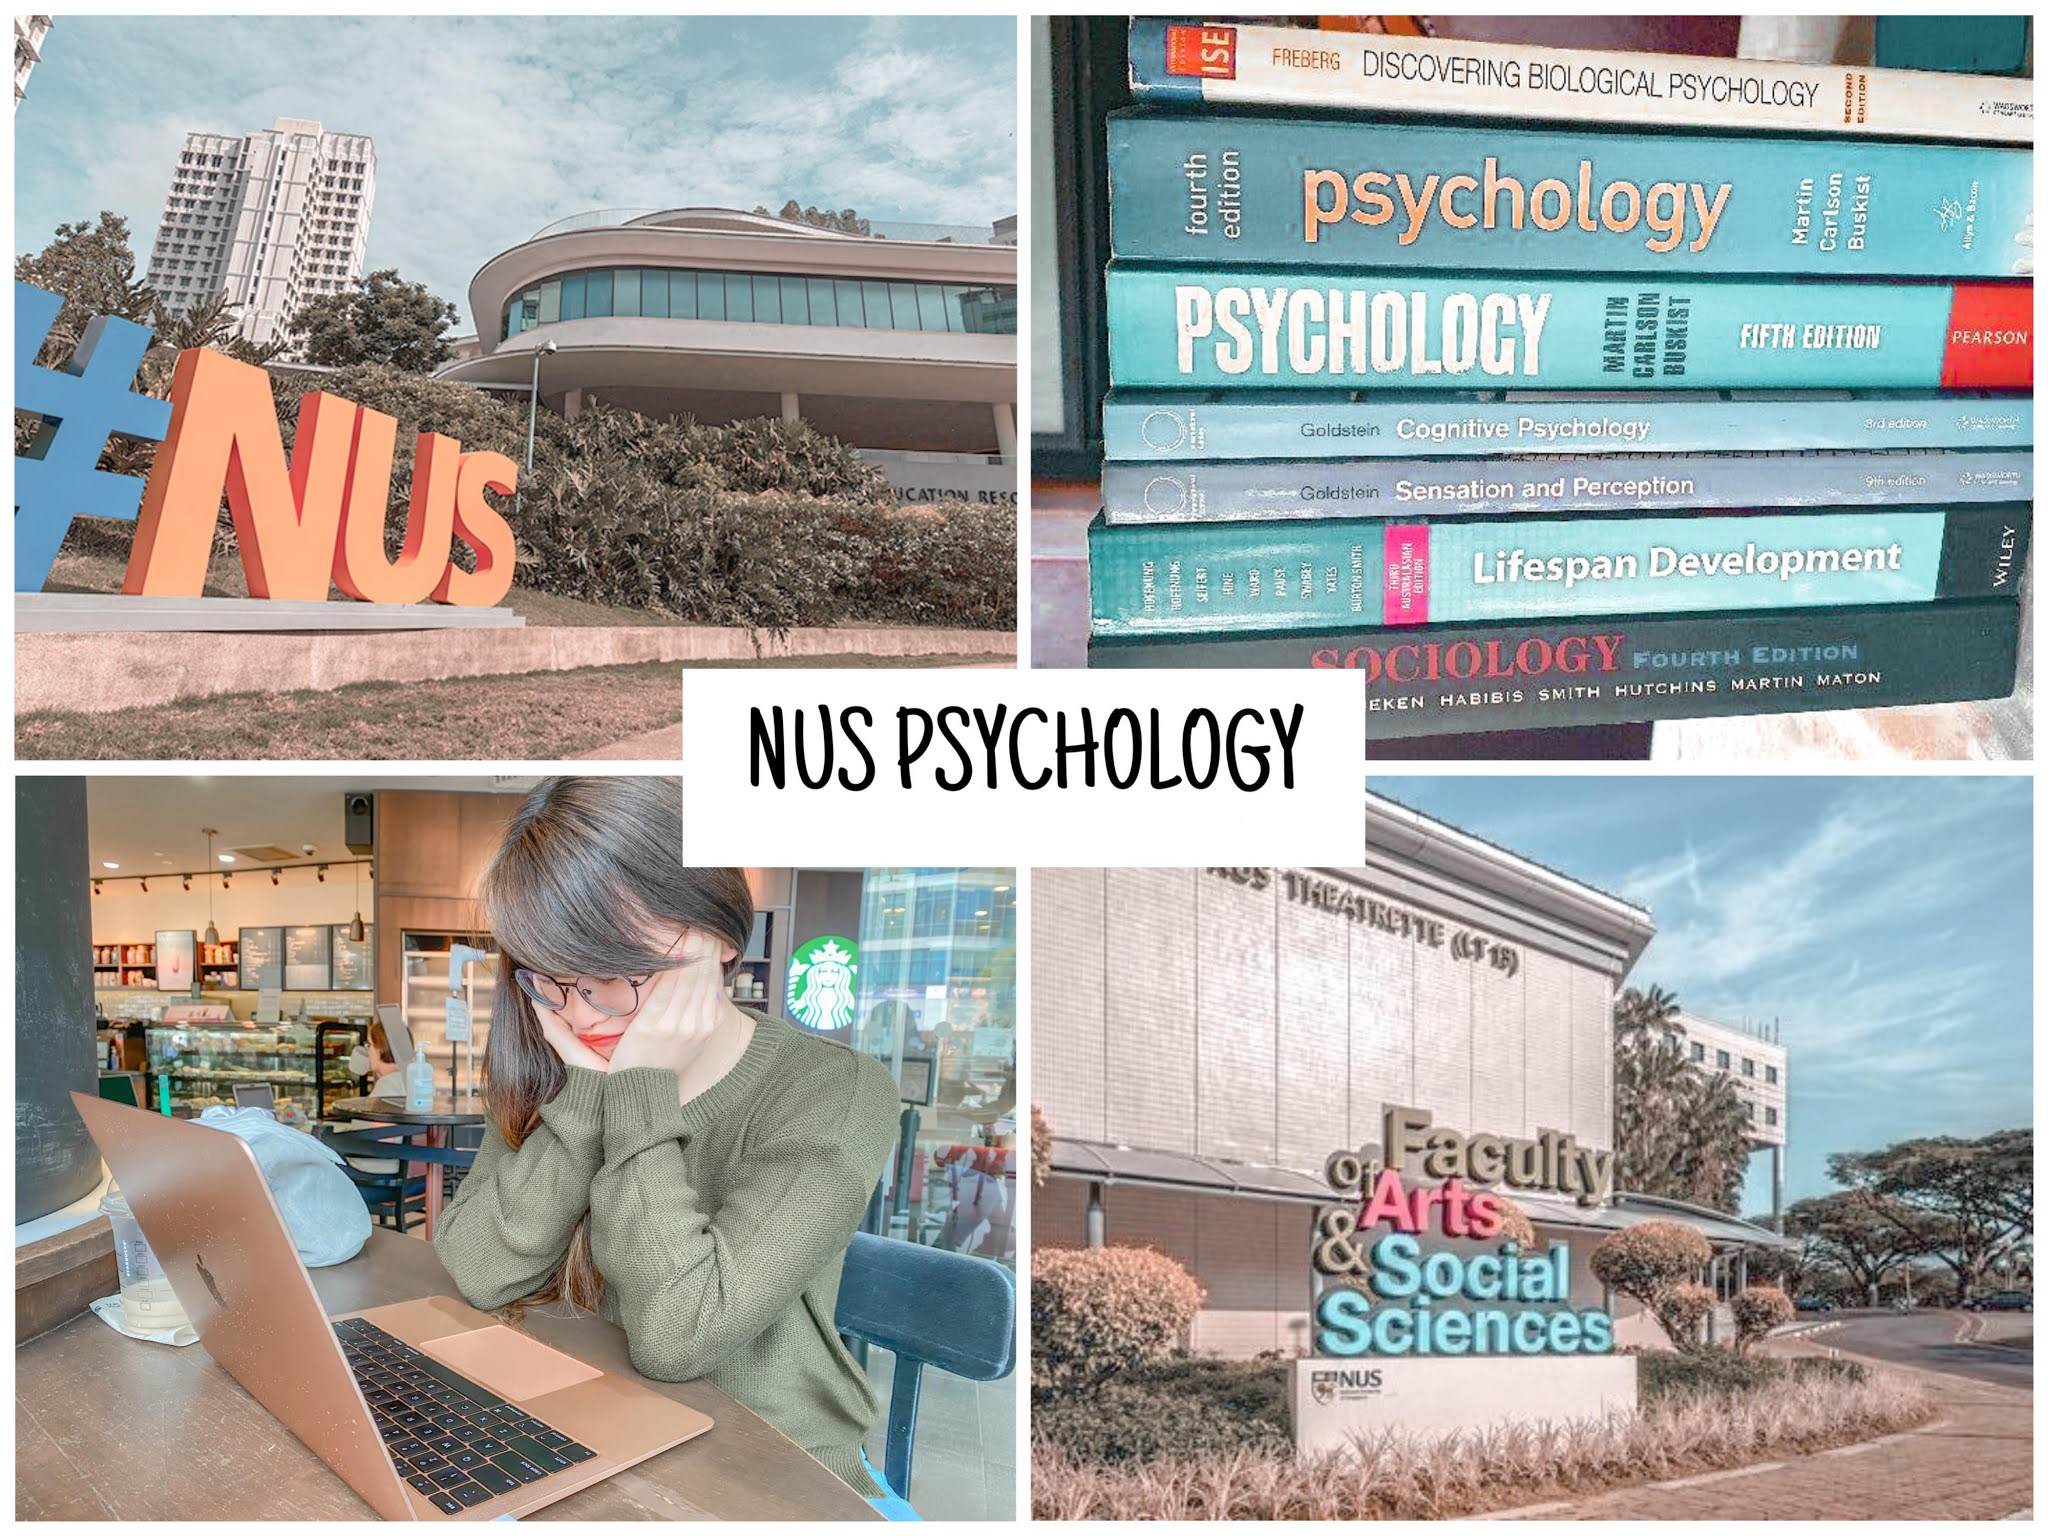 nus psychology honours thesis requirements